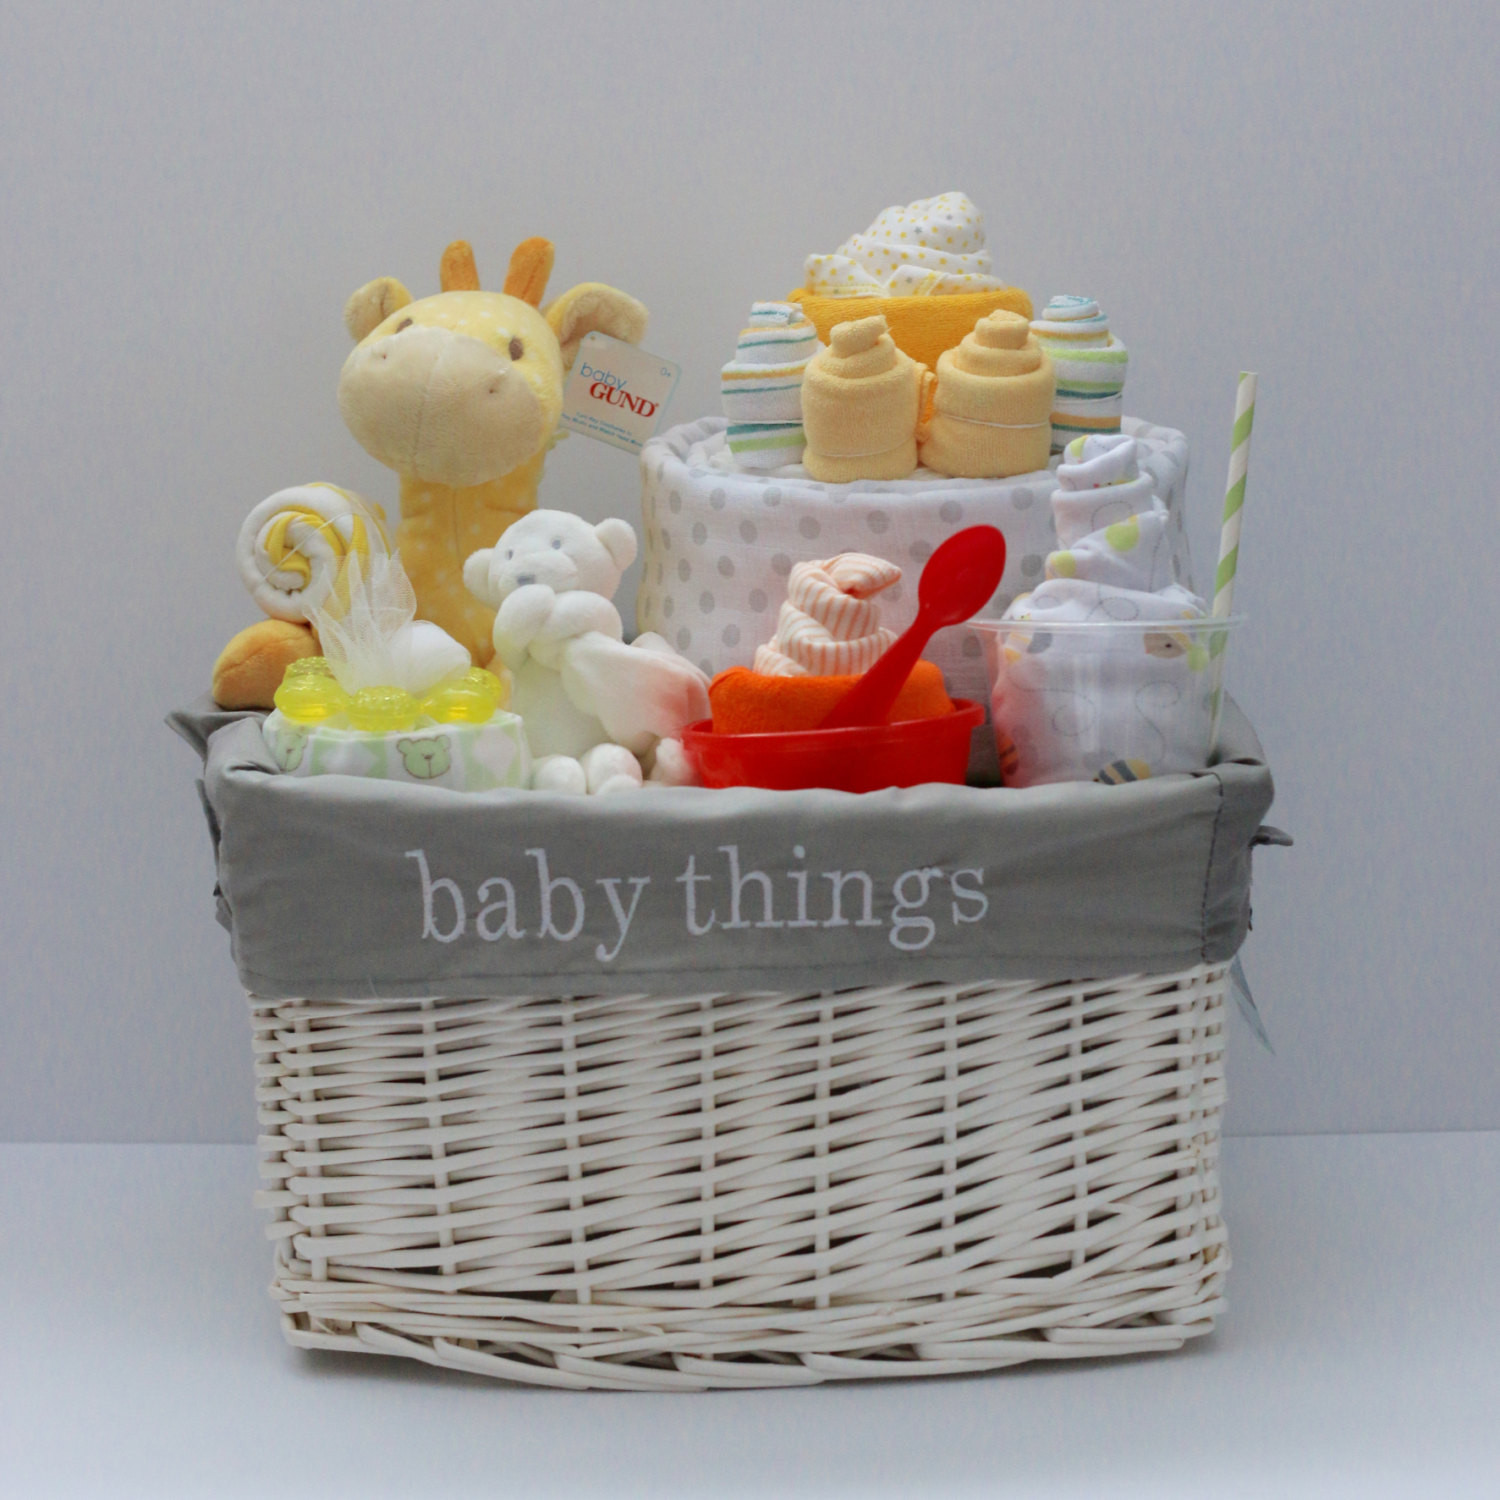 Neat Baby Gifts
 Gender Neutral Baby Gift Basket Baby Shower Gift Unique Baby